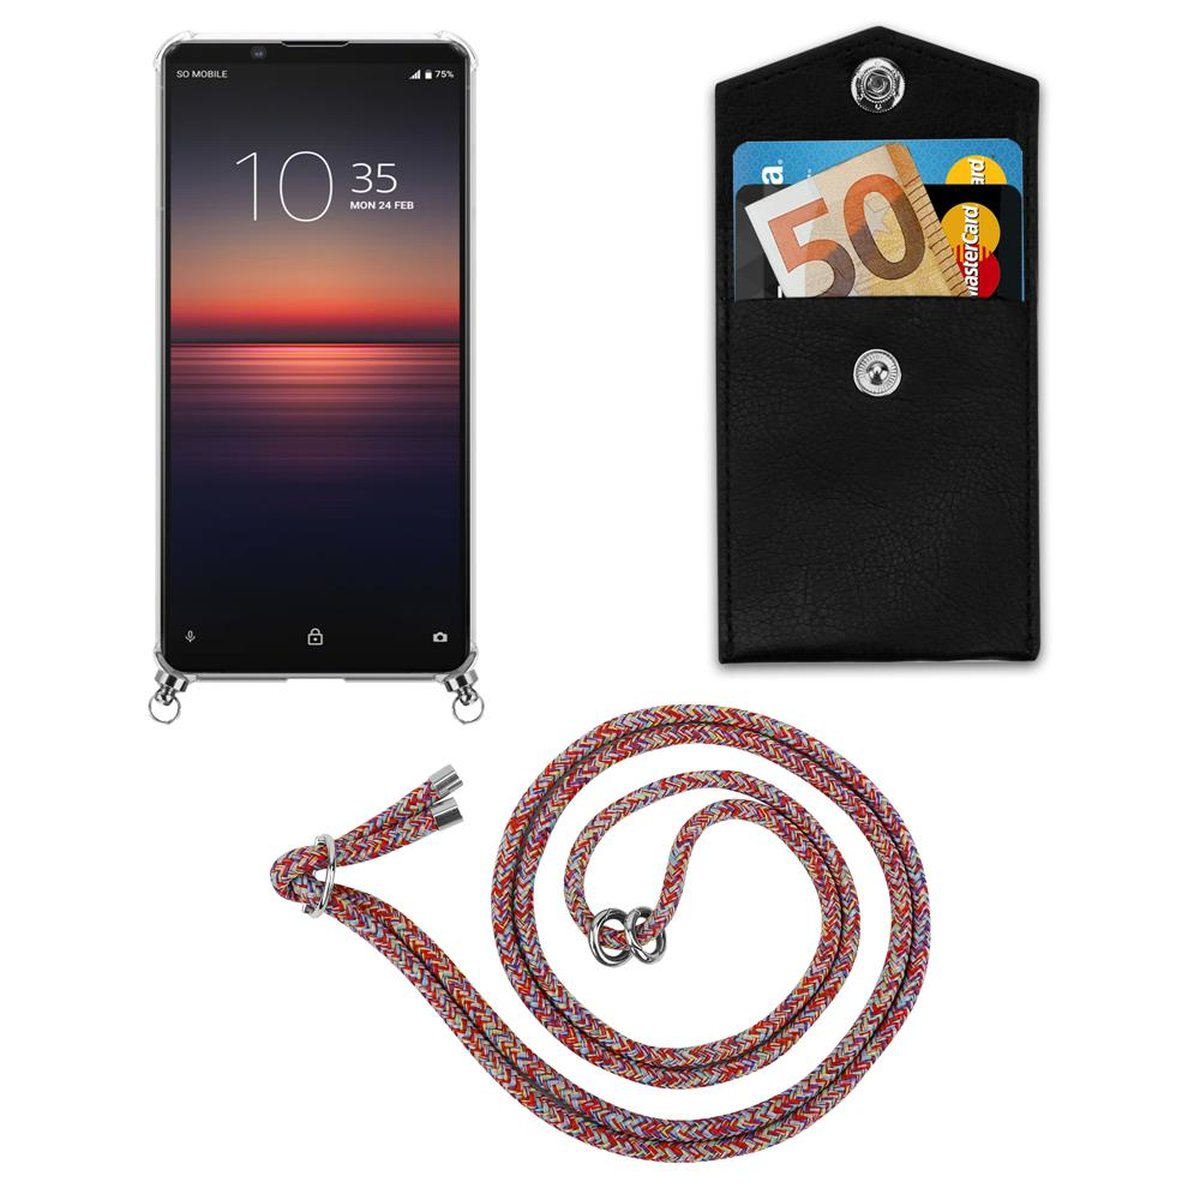 Ringen, abnehmbarer und COLORFUL Backcover, Hülle, Handy Kette Sony, Silber II, CADORABO Band PARROT Kordel mit 1 Xperia